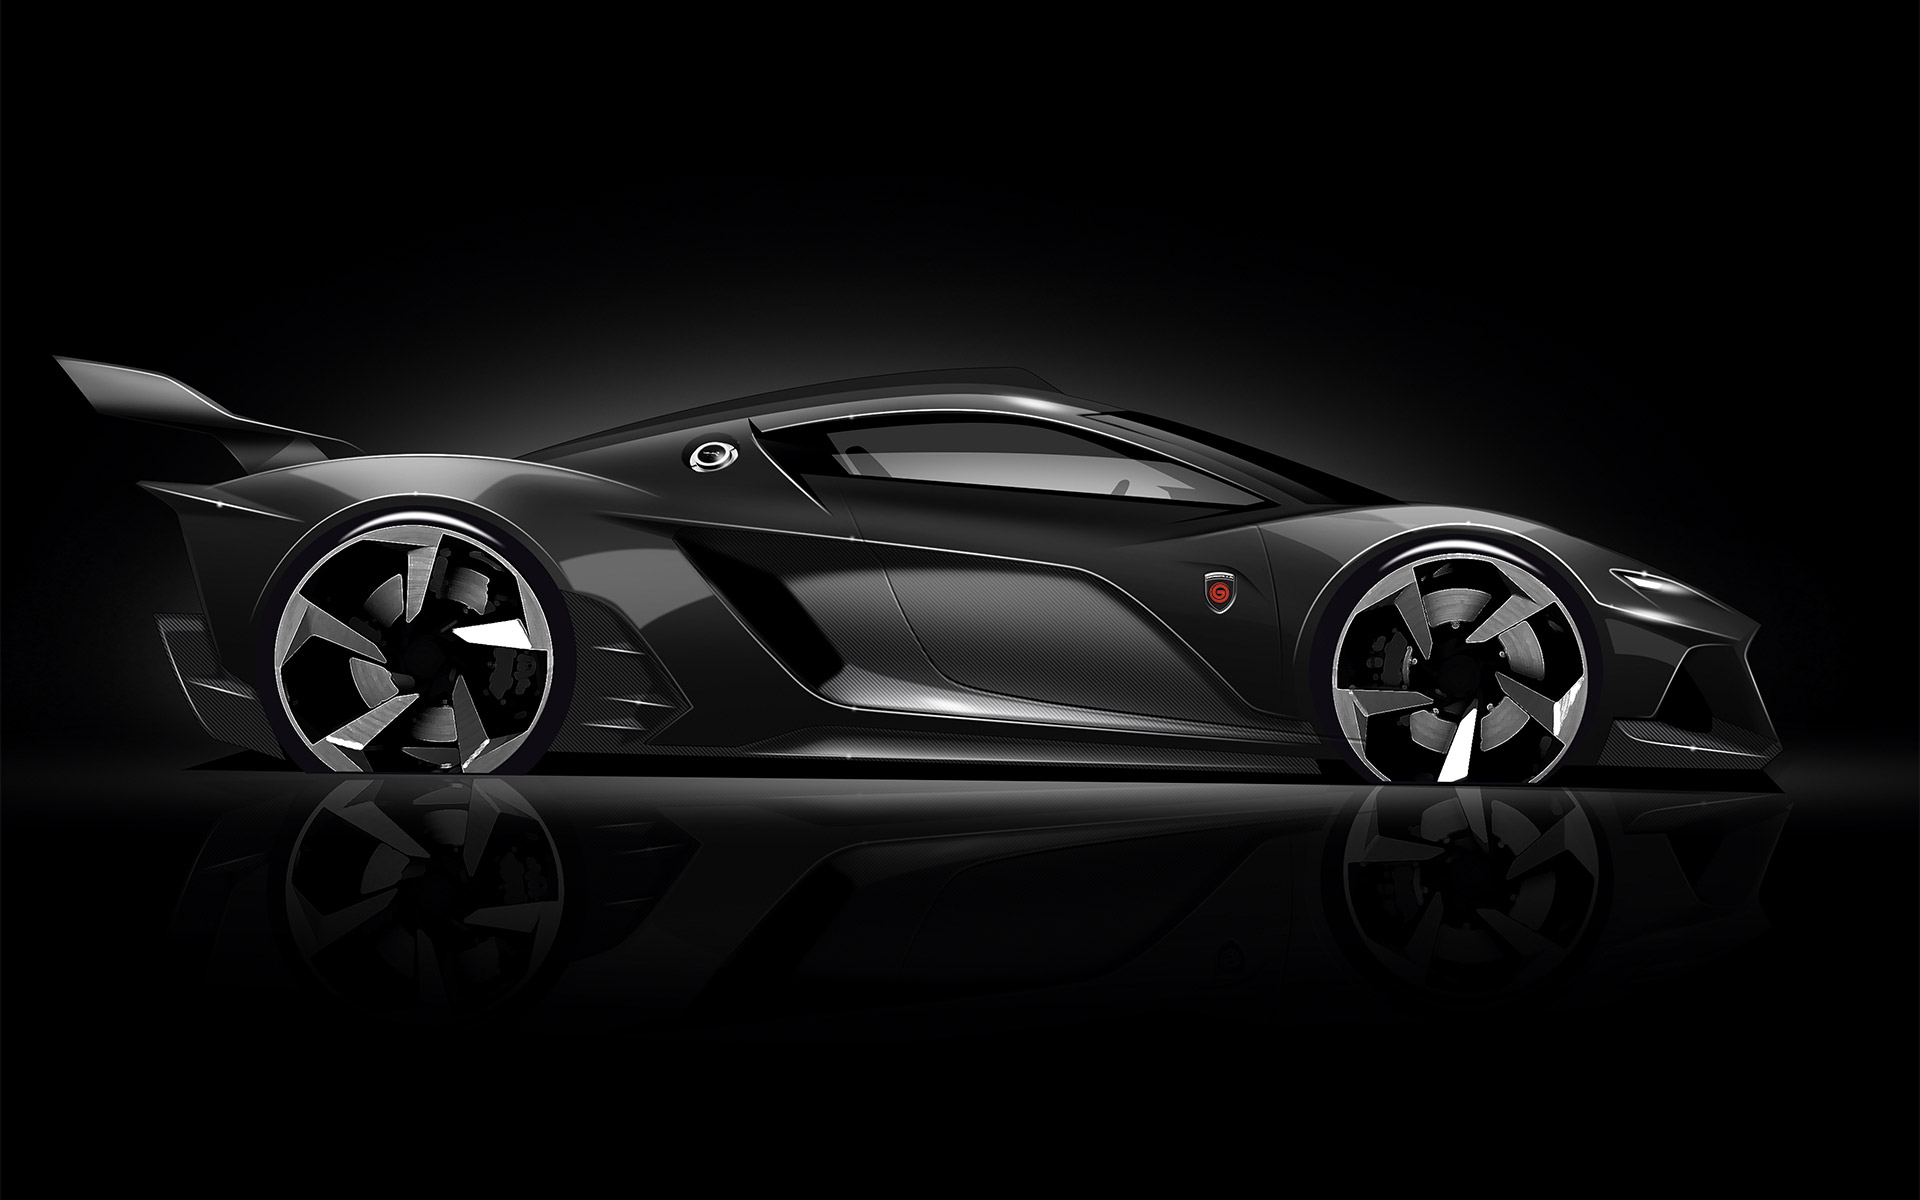 1672329009 The Gemballa supercar is scheduled to go into production in